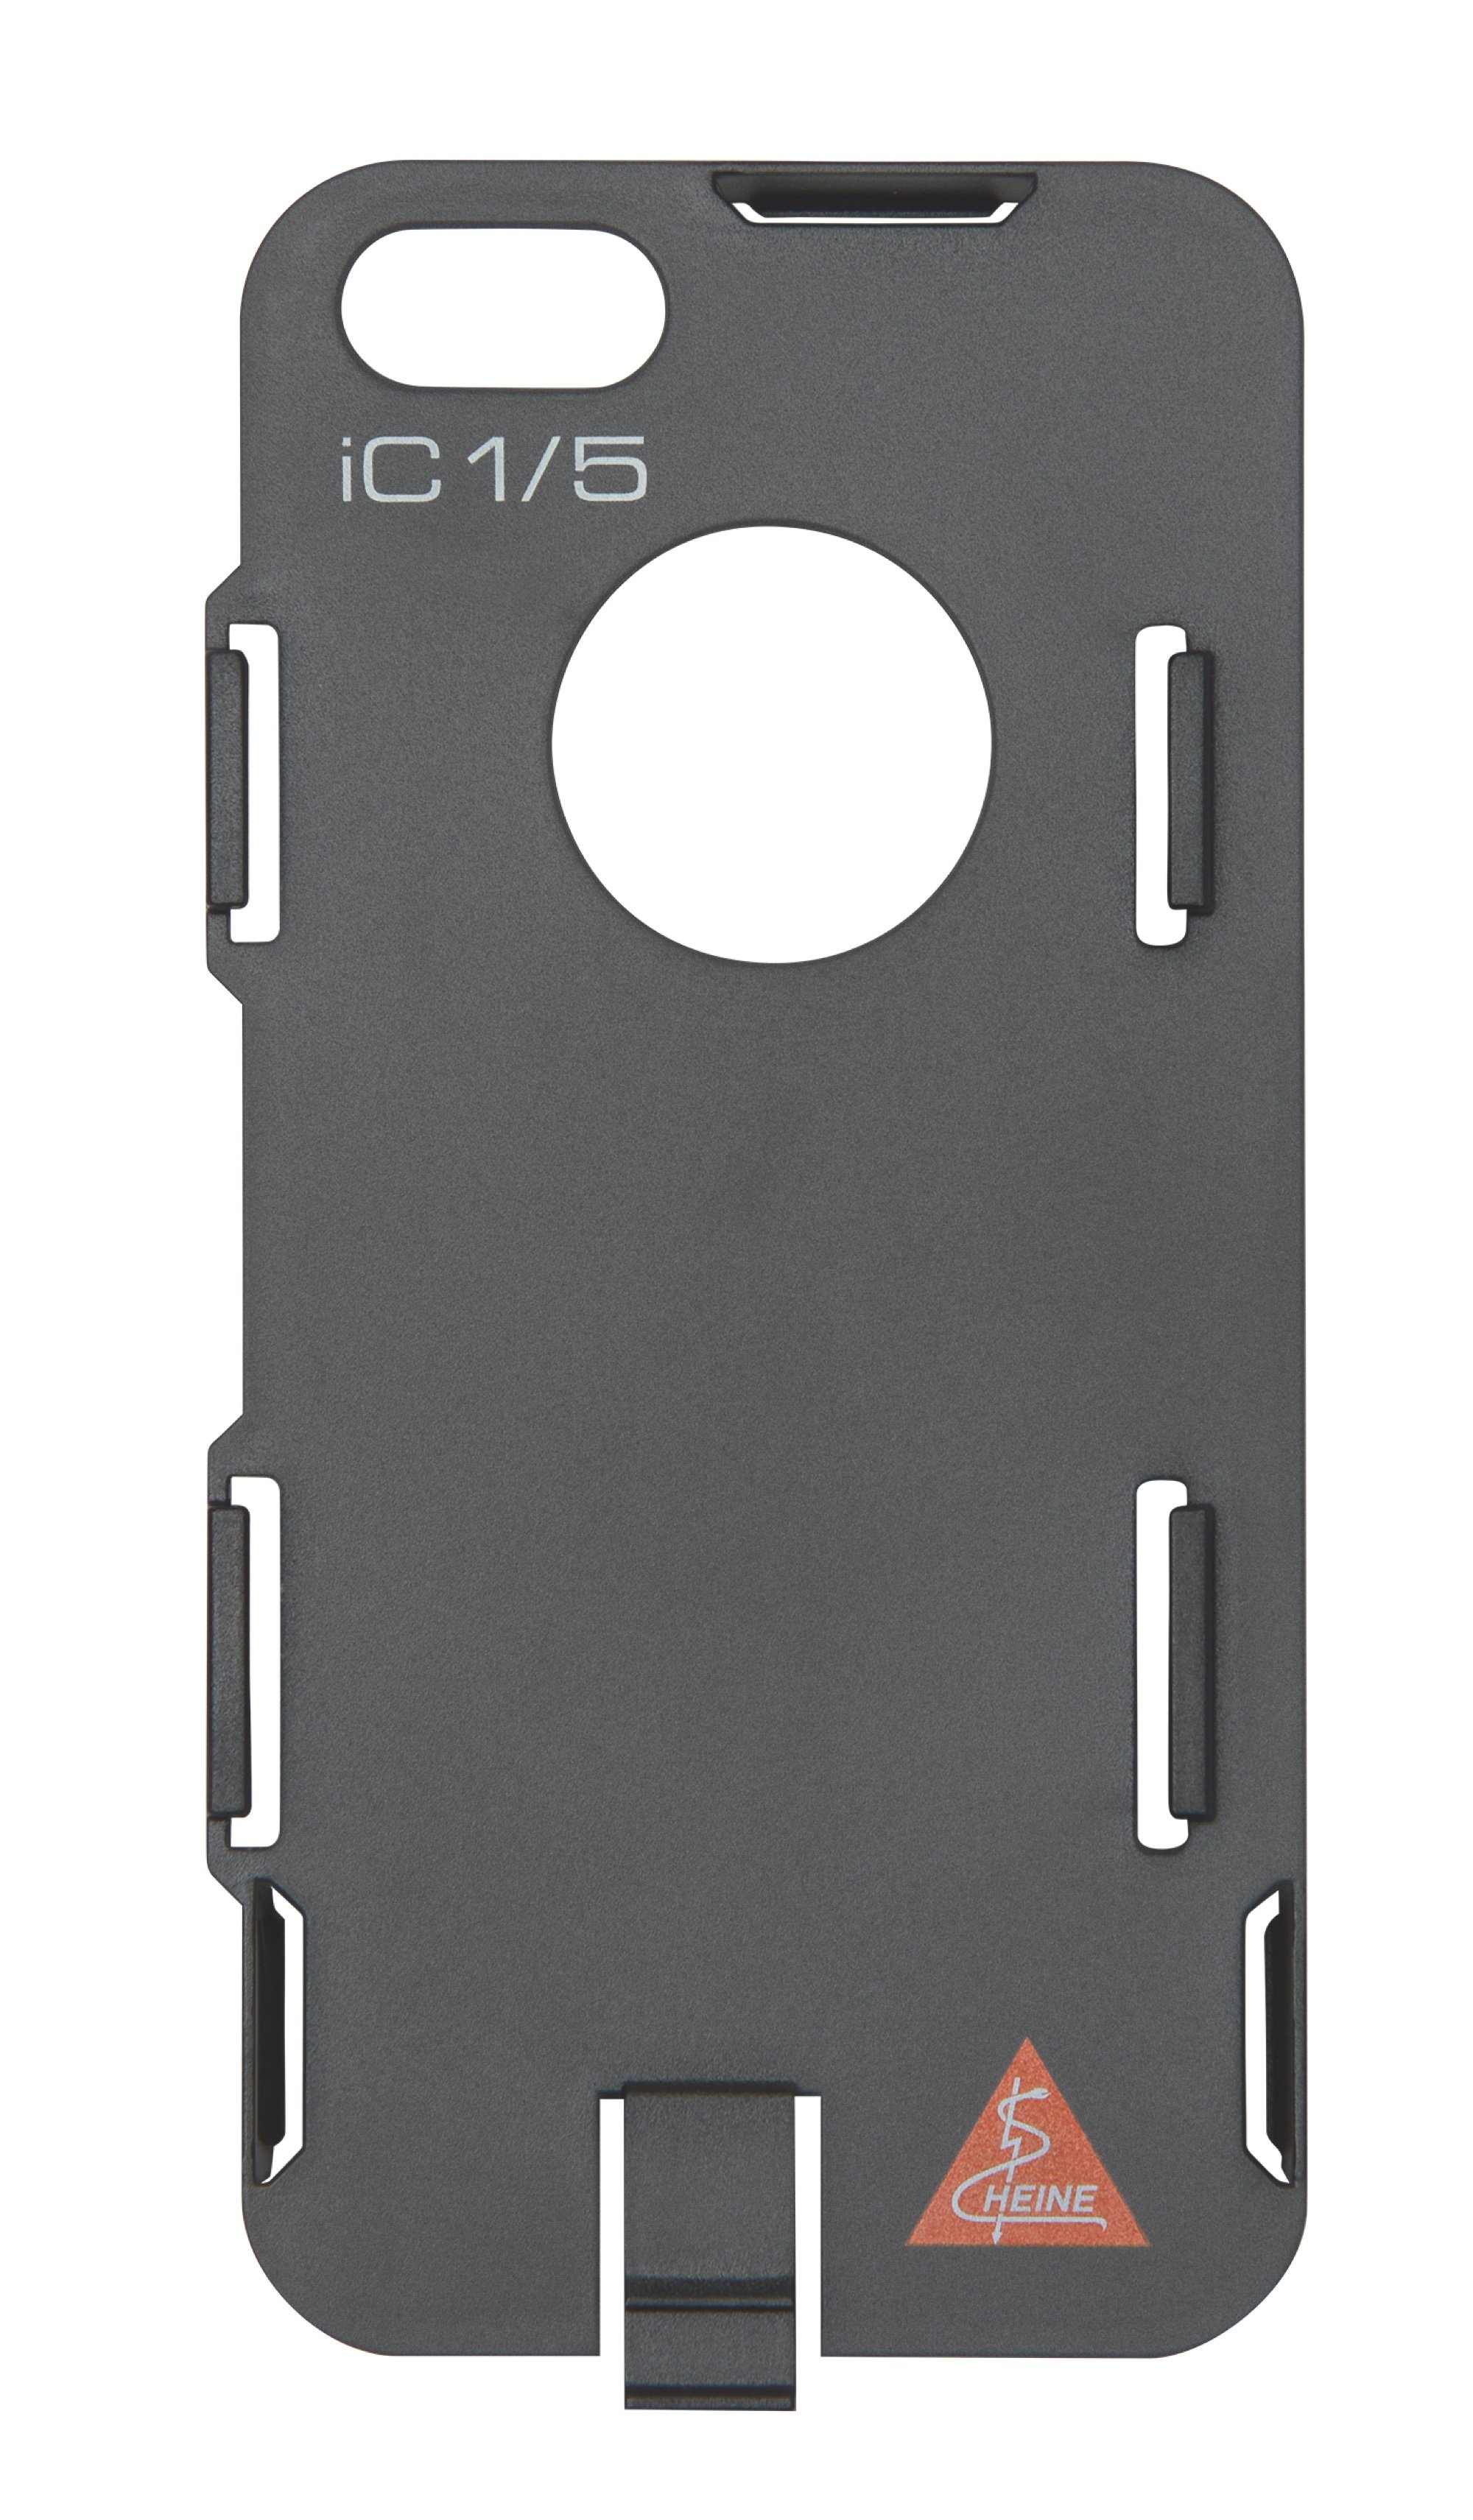 HEINE iC 1 Mounting Case for iPhone 5/5s/SE